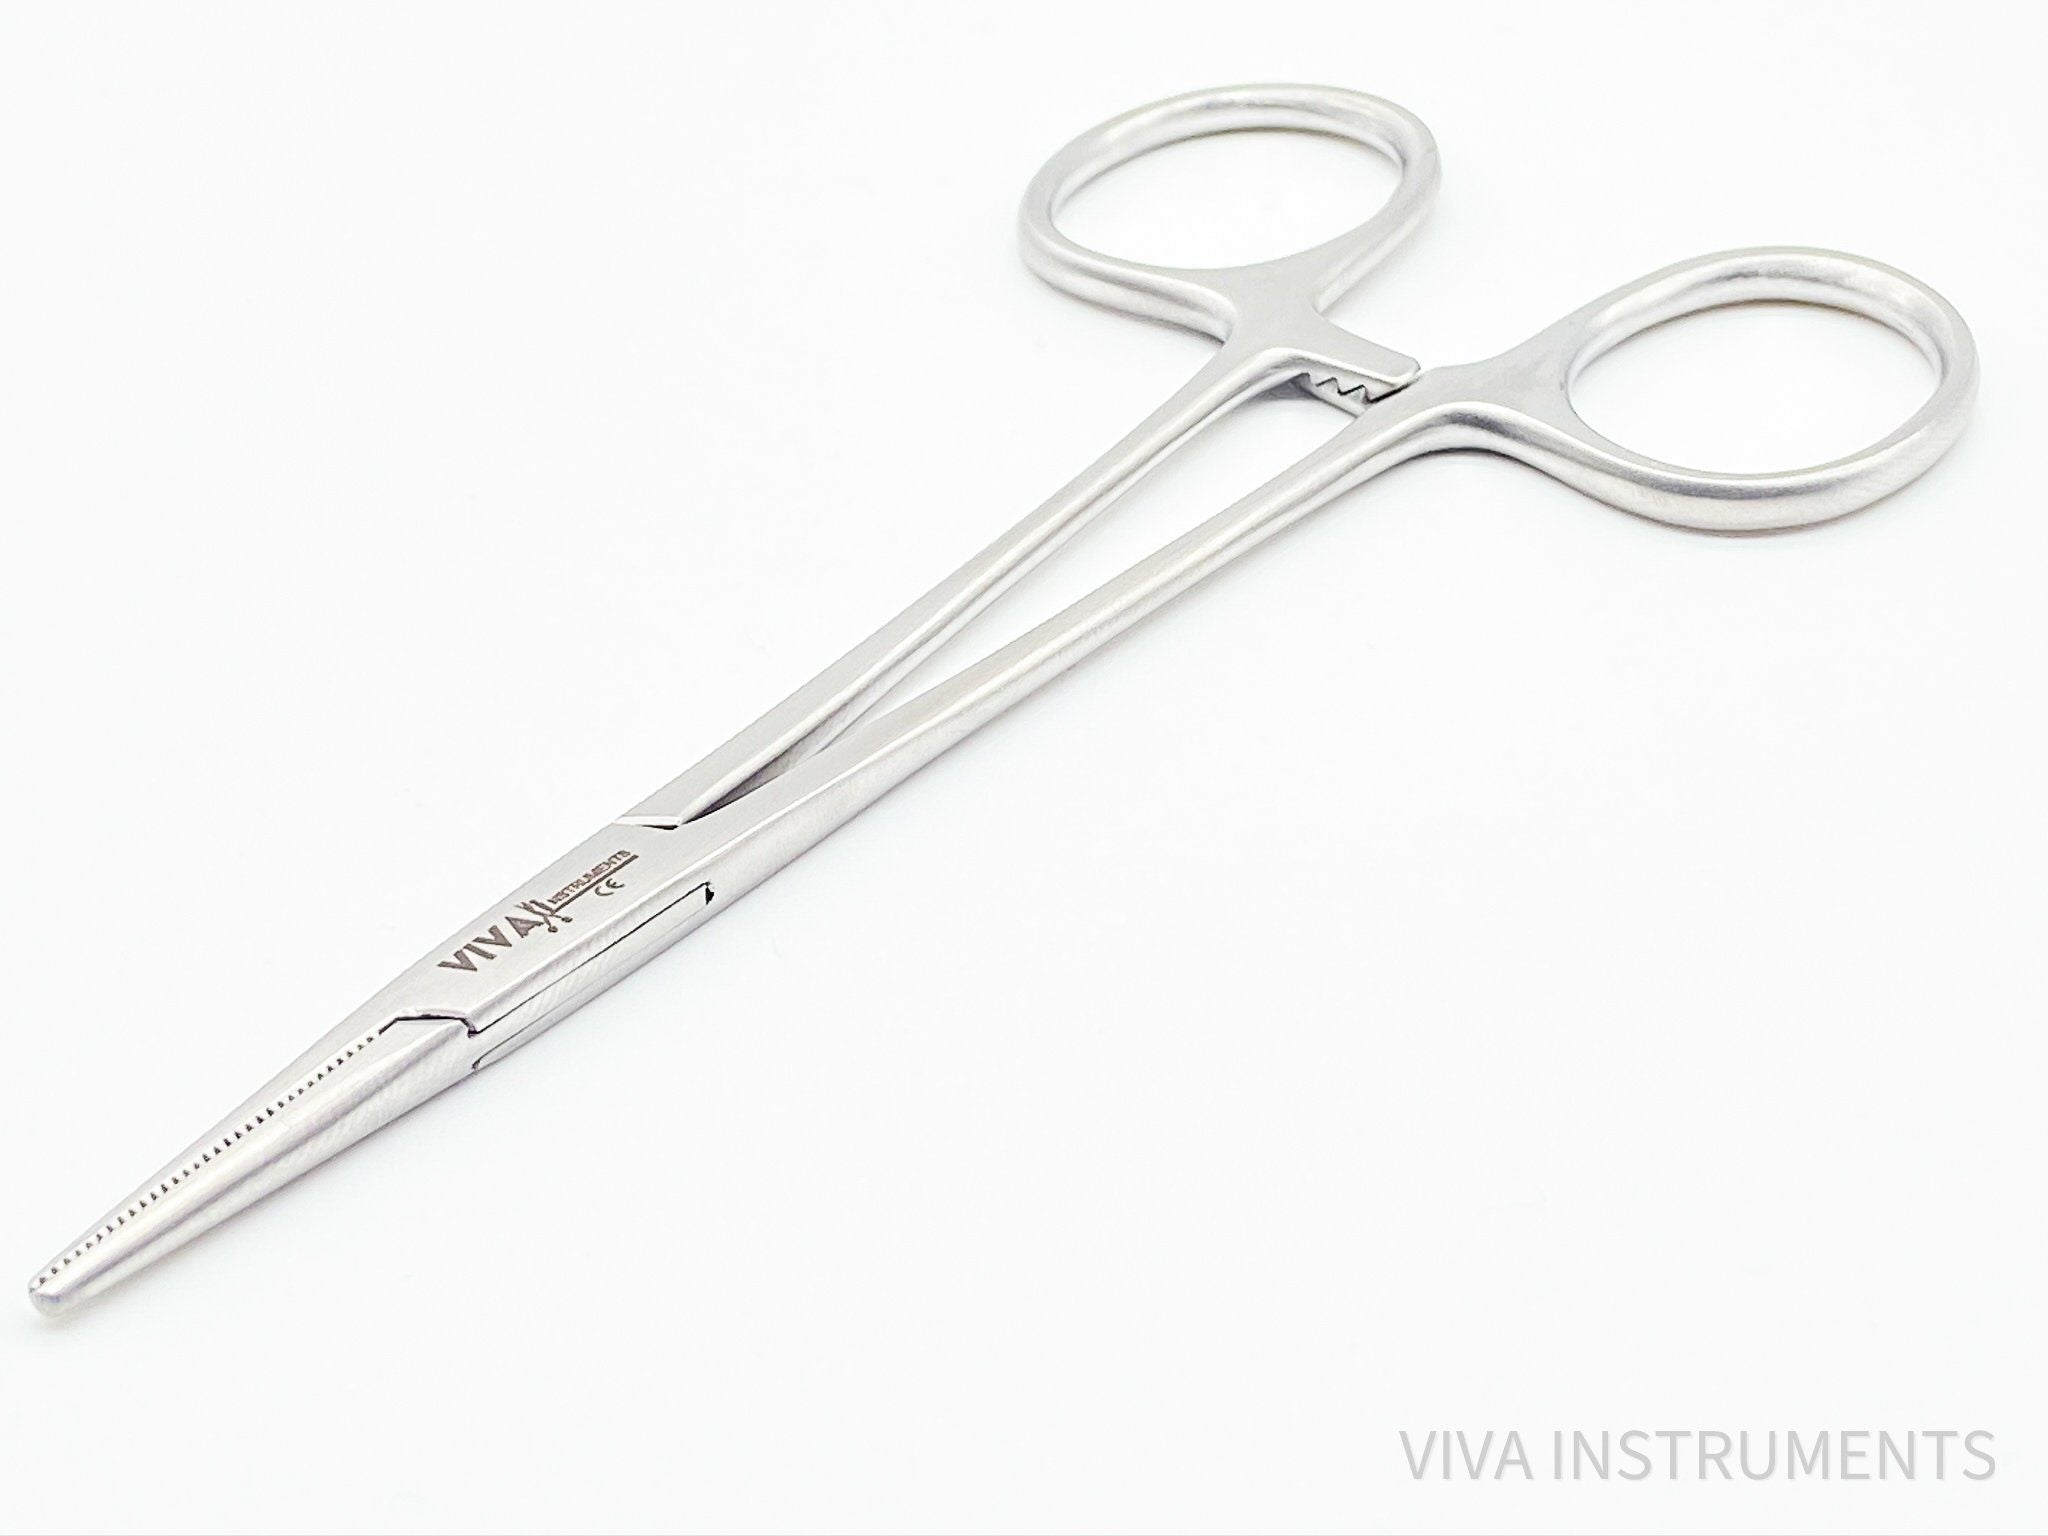 Artery Forceps - Mosquito Forceps Straight 12.5cm